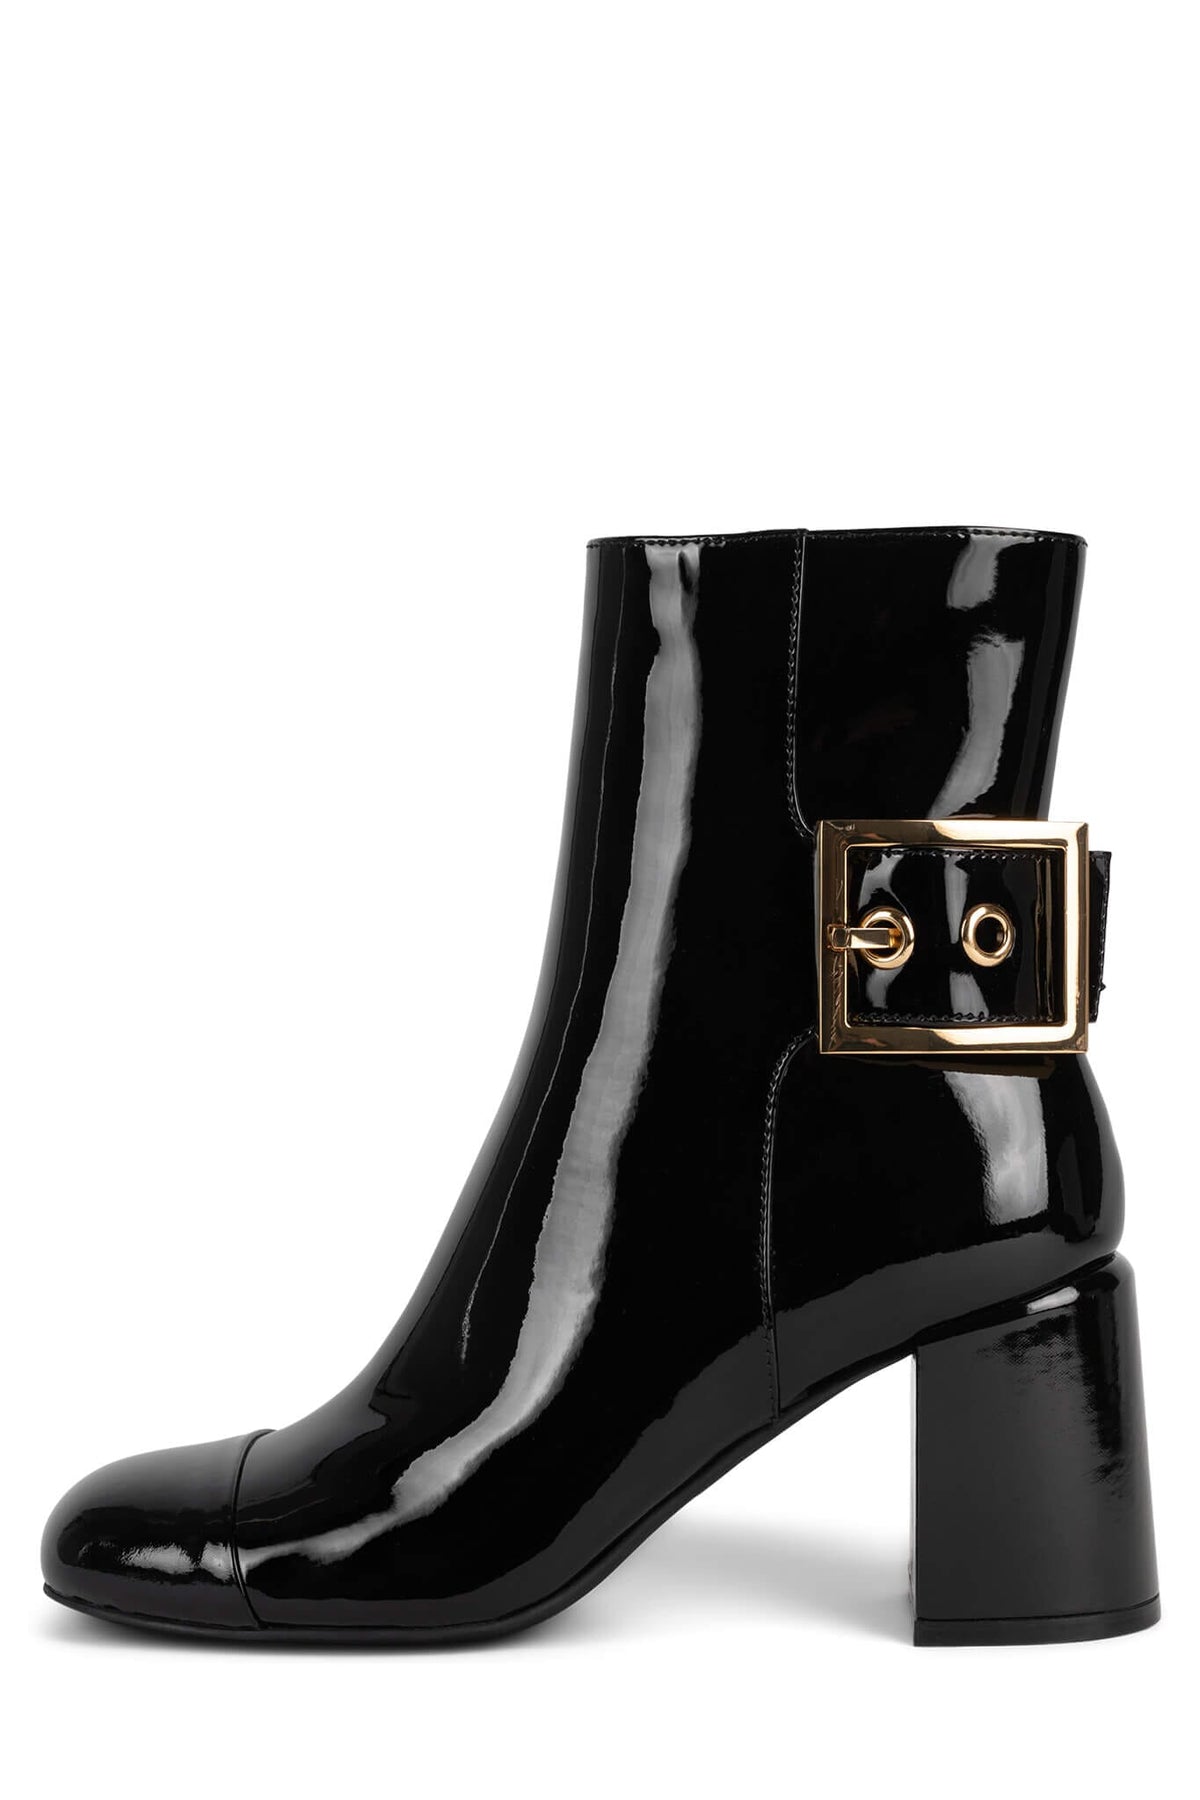 ACADEME Jeffrey Campbell Black Patent Gold Buckle Heeled Boots 